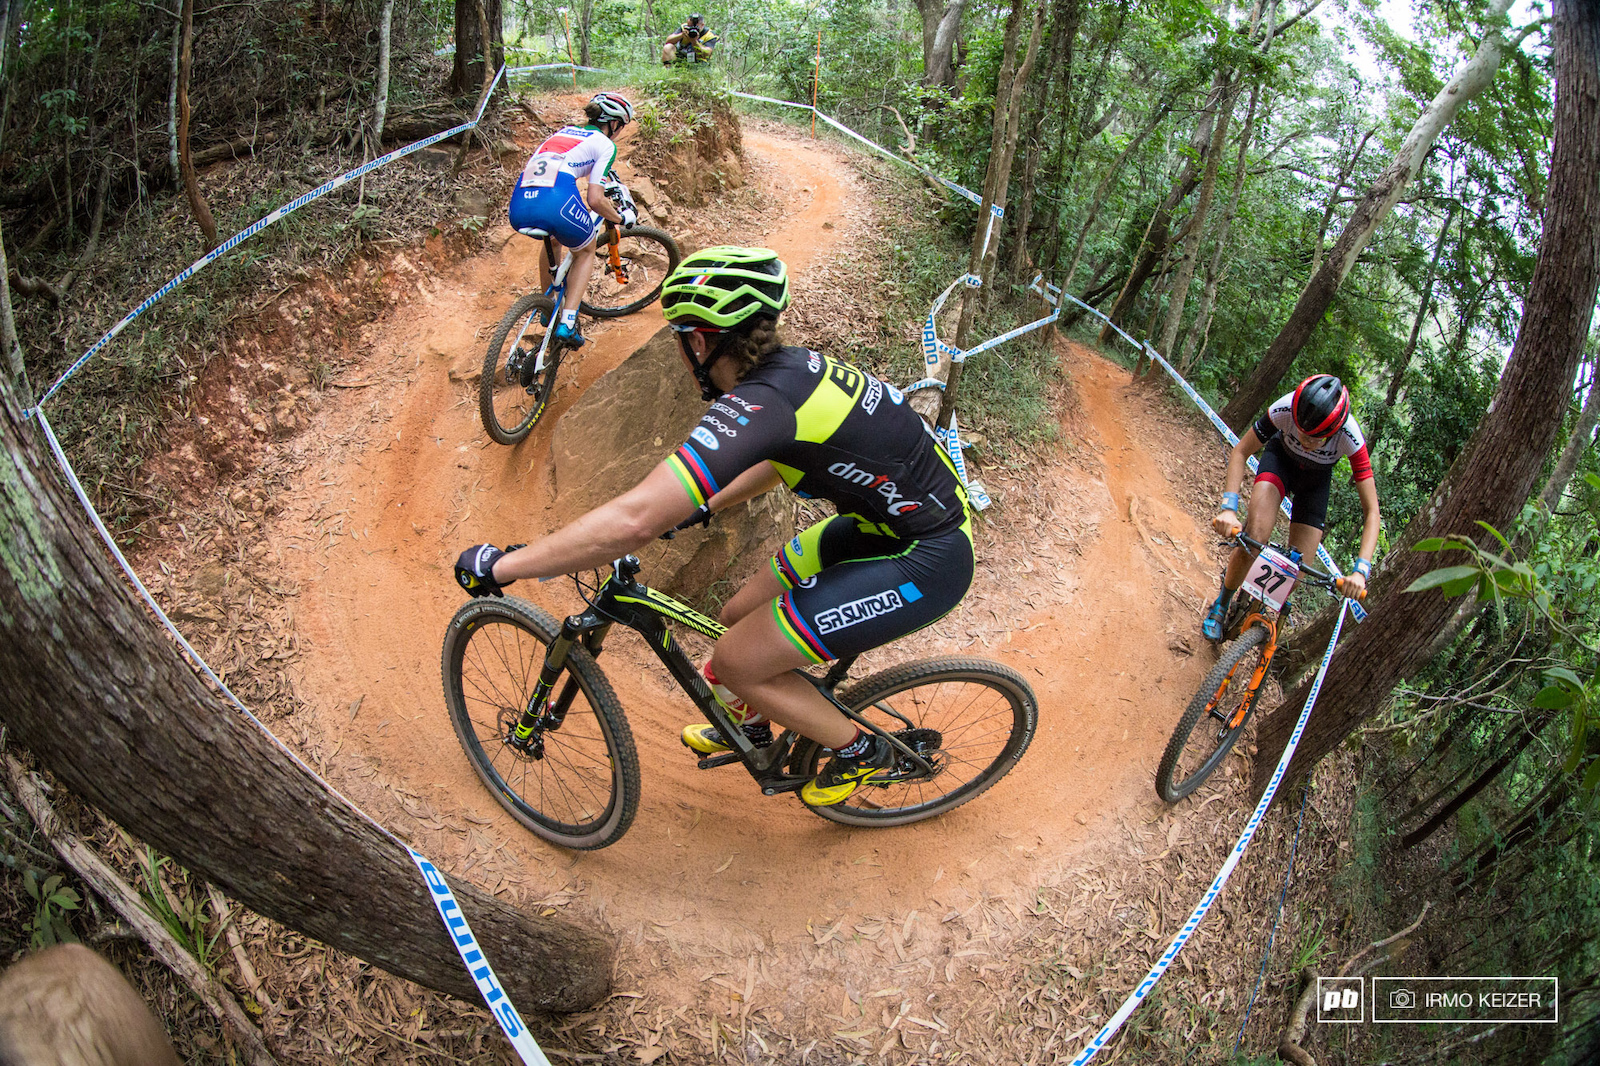 The women battle during the first laps of the course on the narrow trails of Cairns.